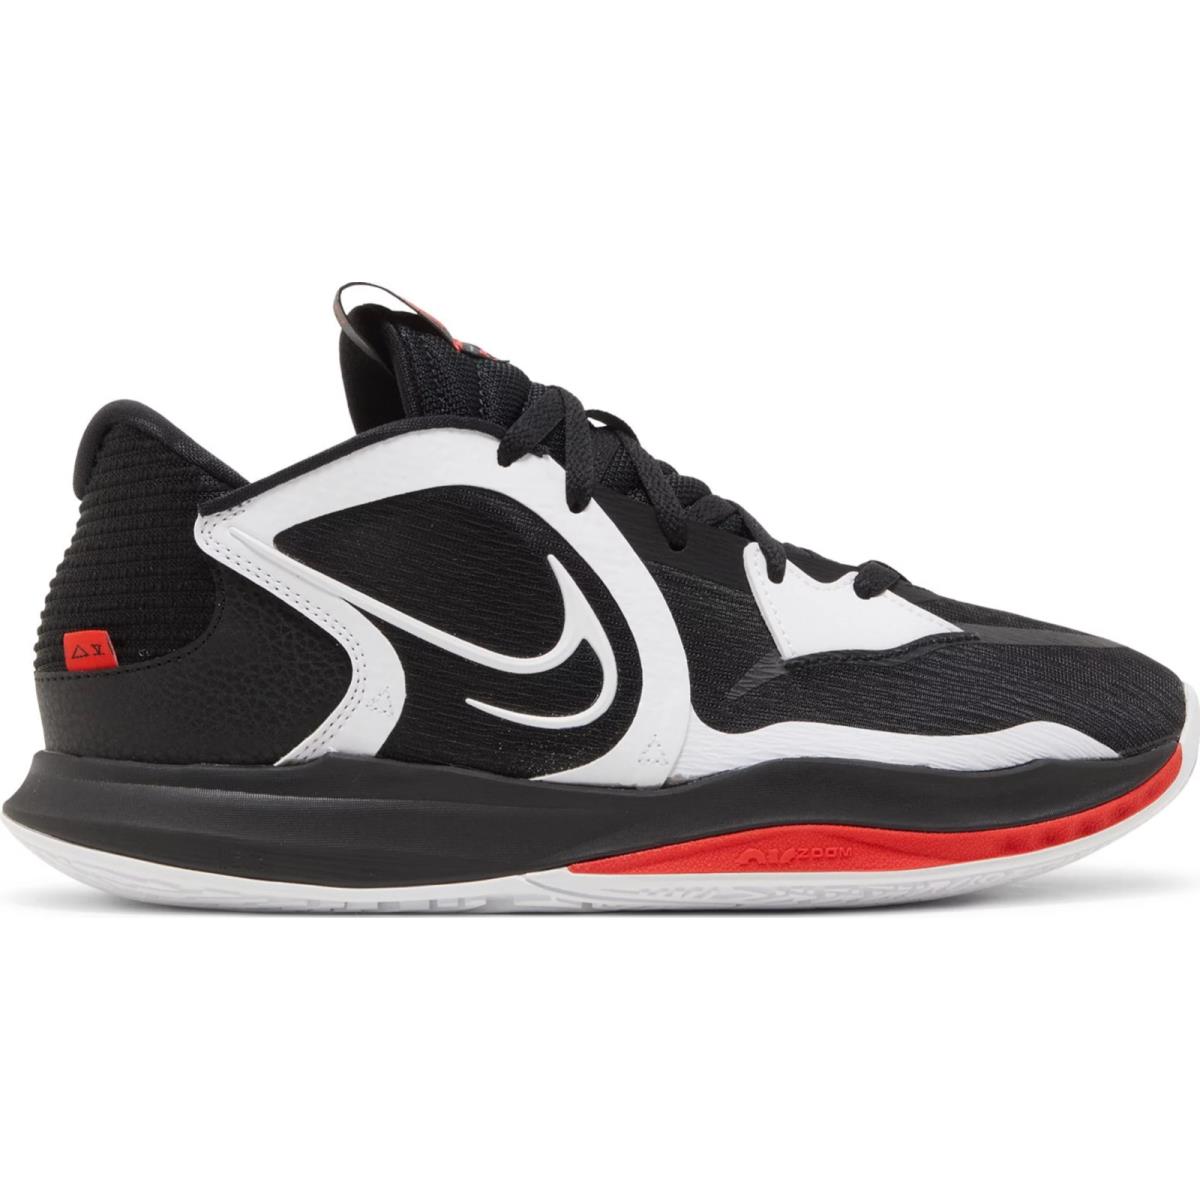 Nike Kyrie Low 5 Bred Black White Chile Red Sneakers Shoes DJ6012-001 Men`s 8 - Black